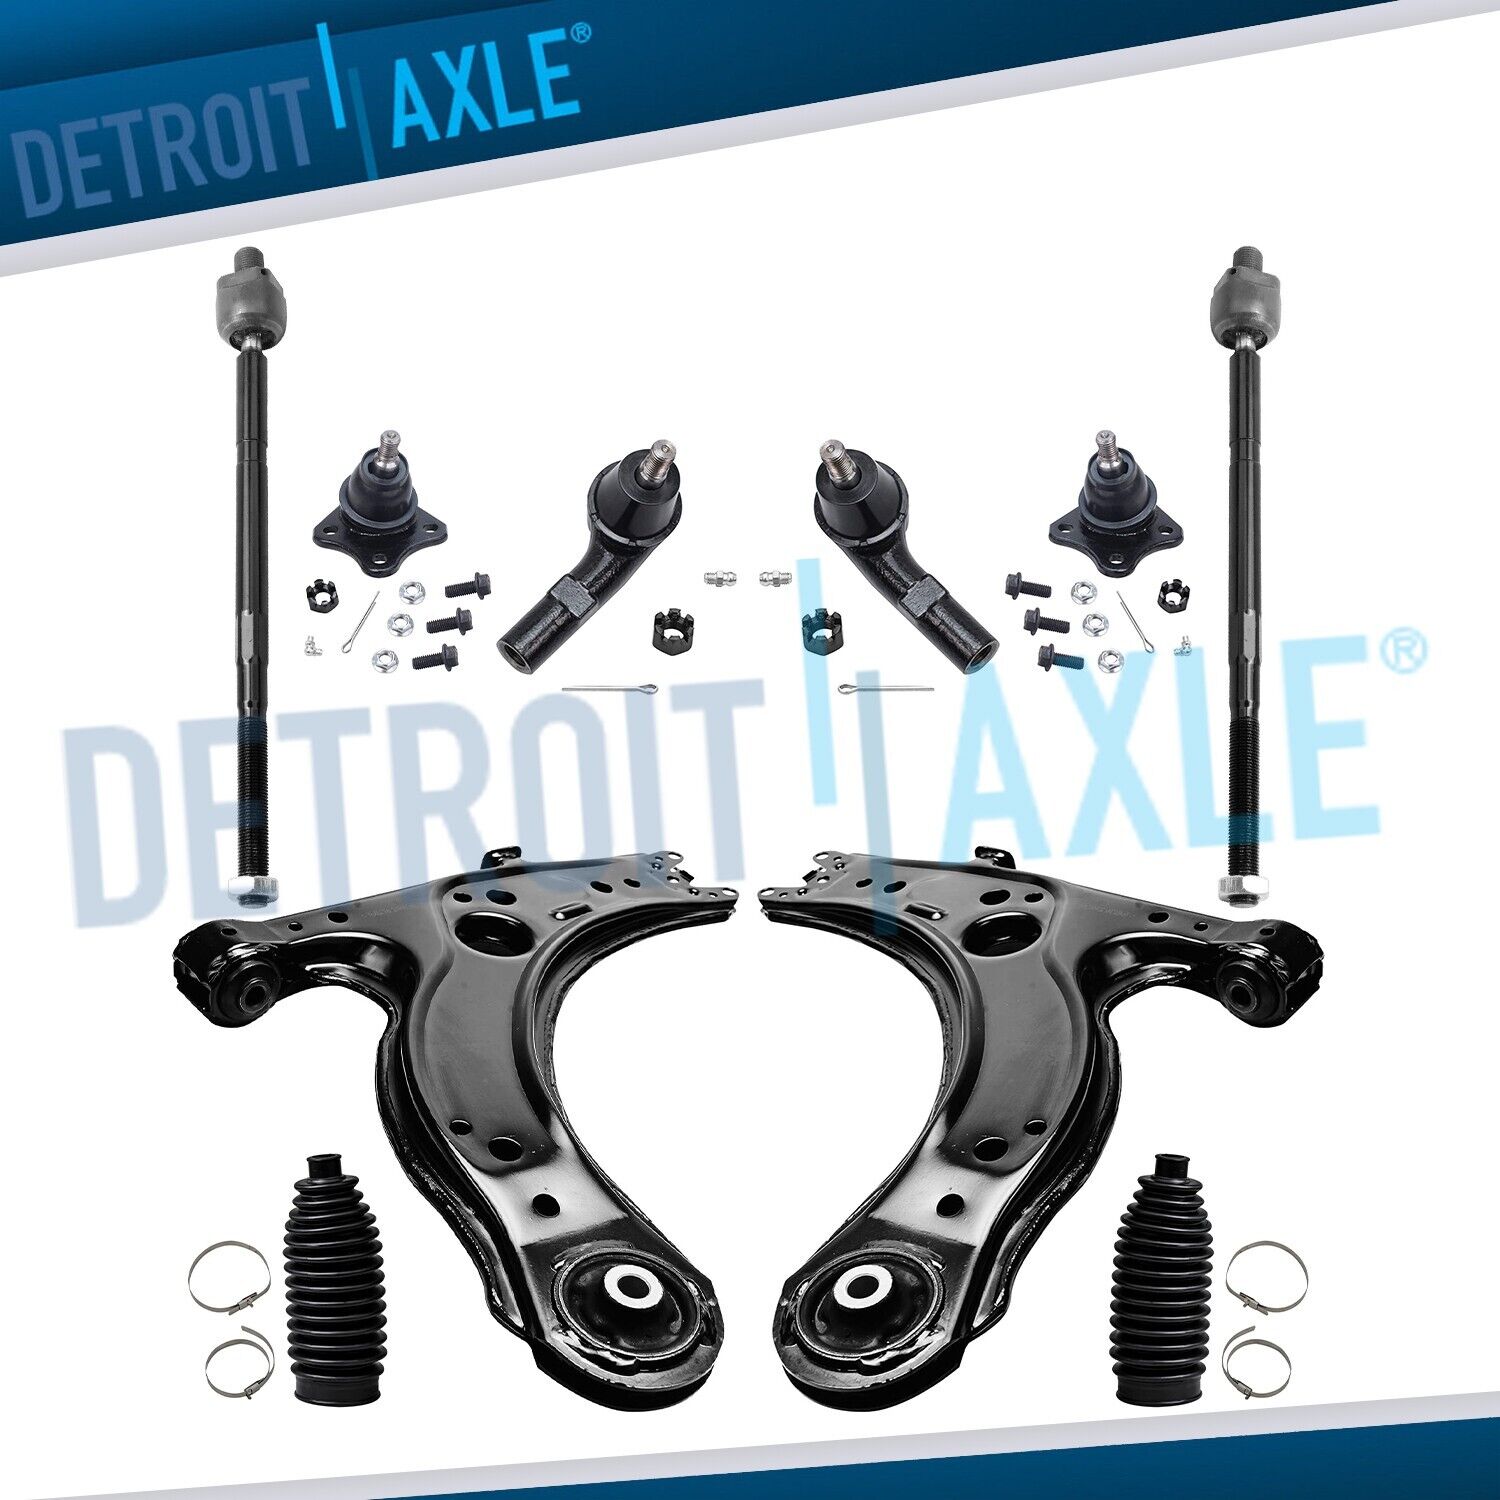 Front Lower Control Arms Tie Rods Suspension Kit for 99-05 VW Jetta Golf Beetle